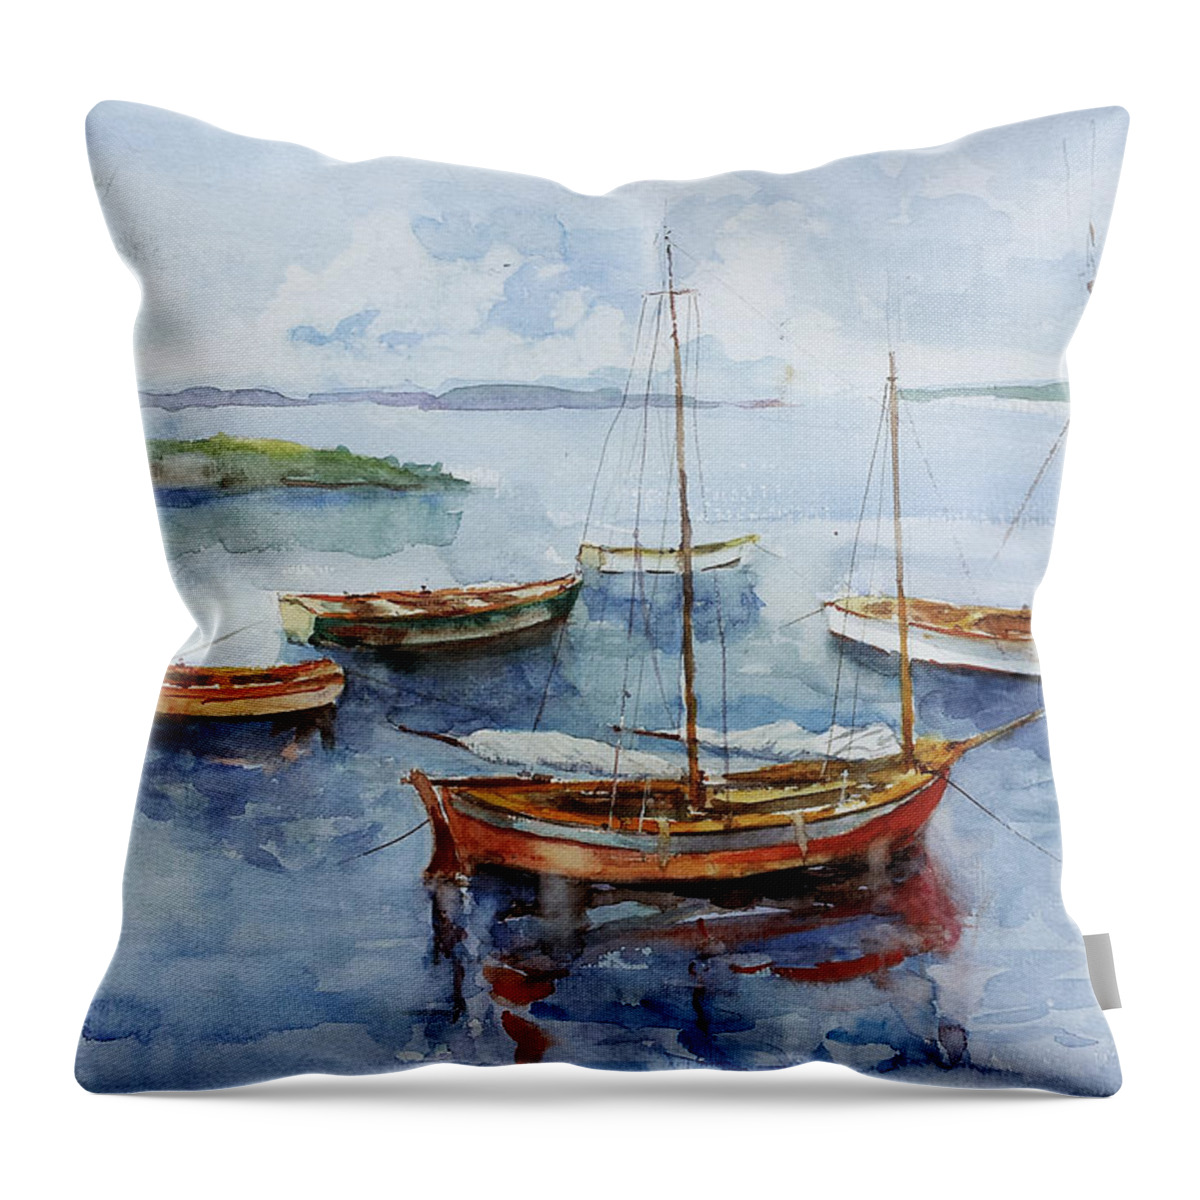 Bay Throw Pillow featuring the painting The Boats On A Calm Bay by Faruk Koksal